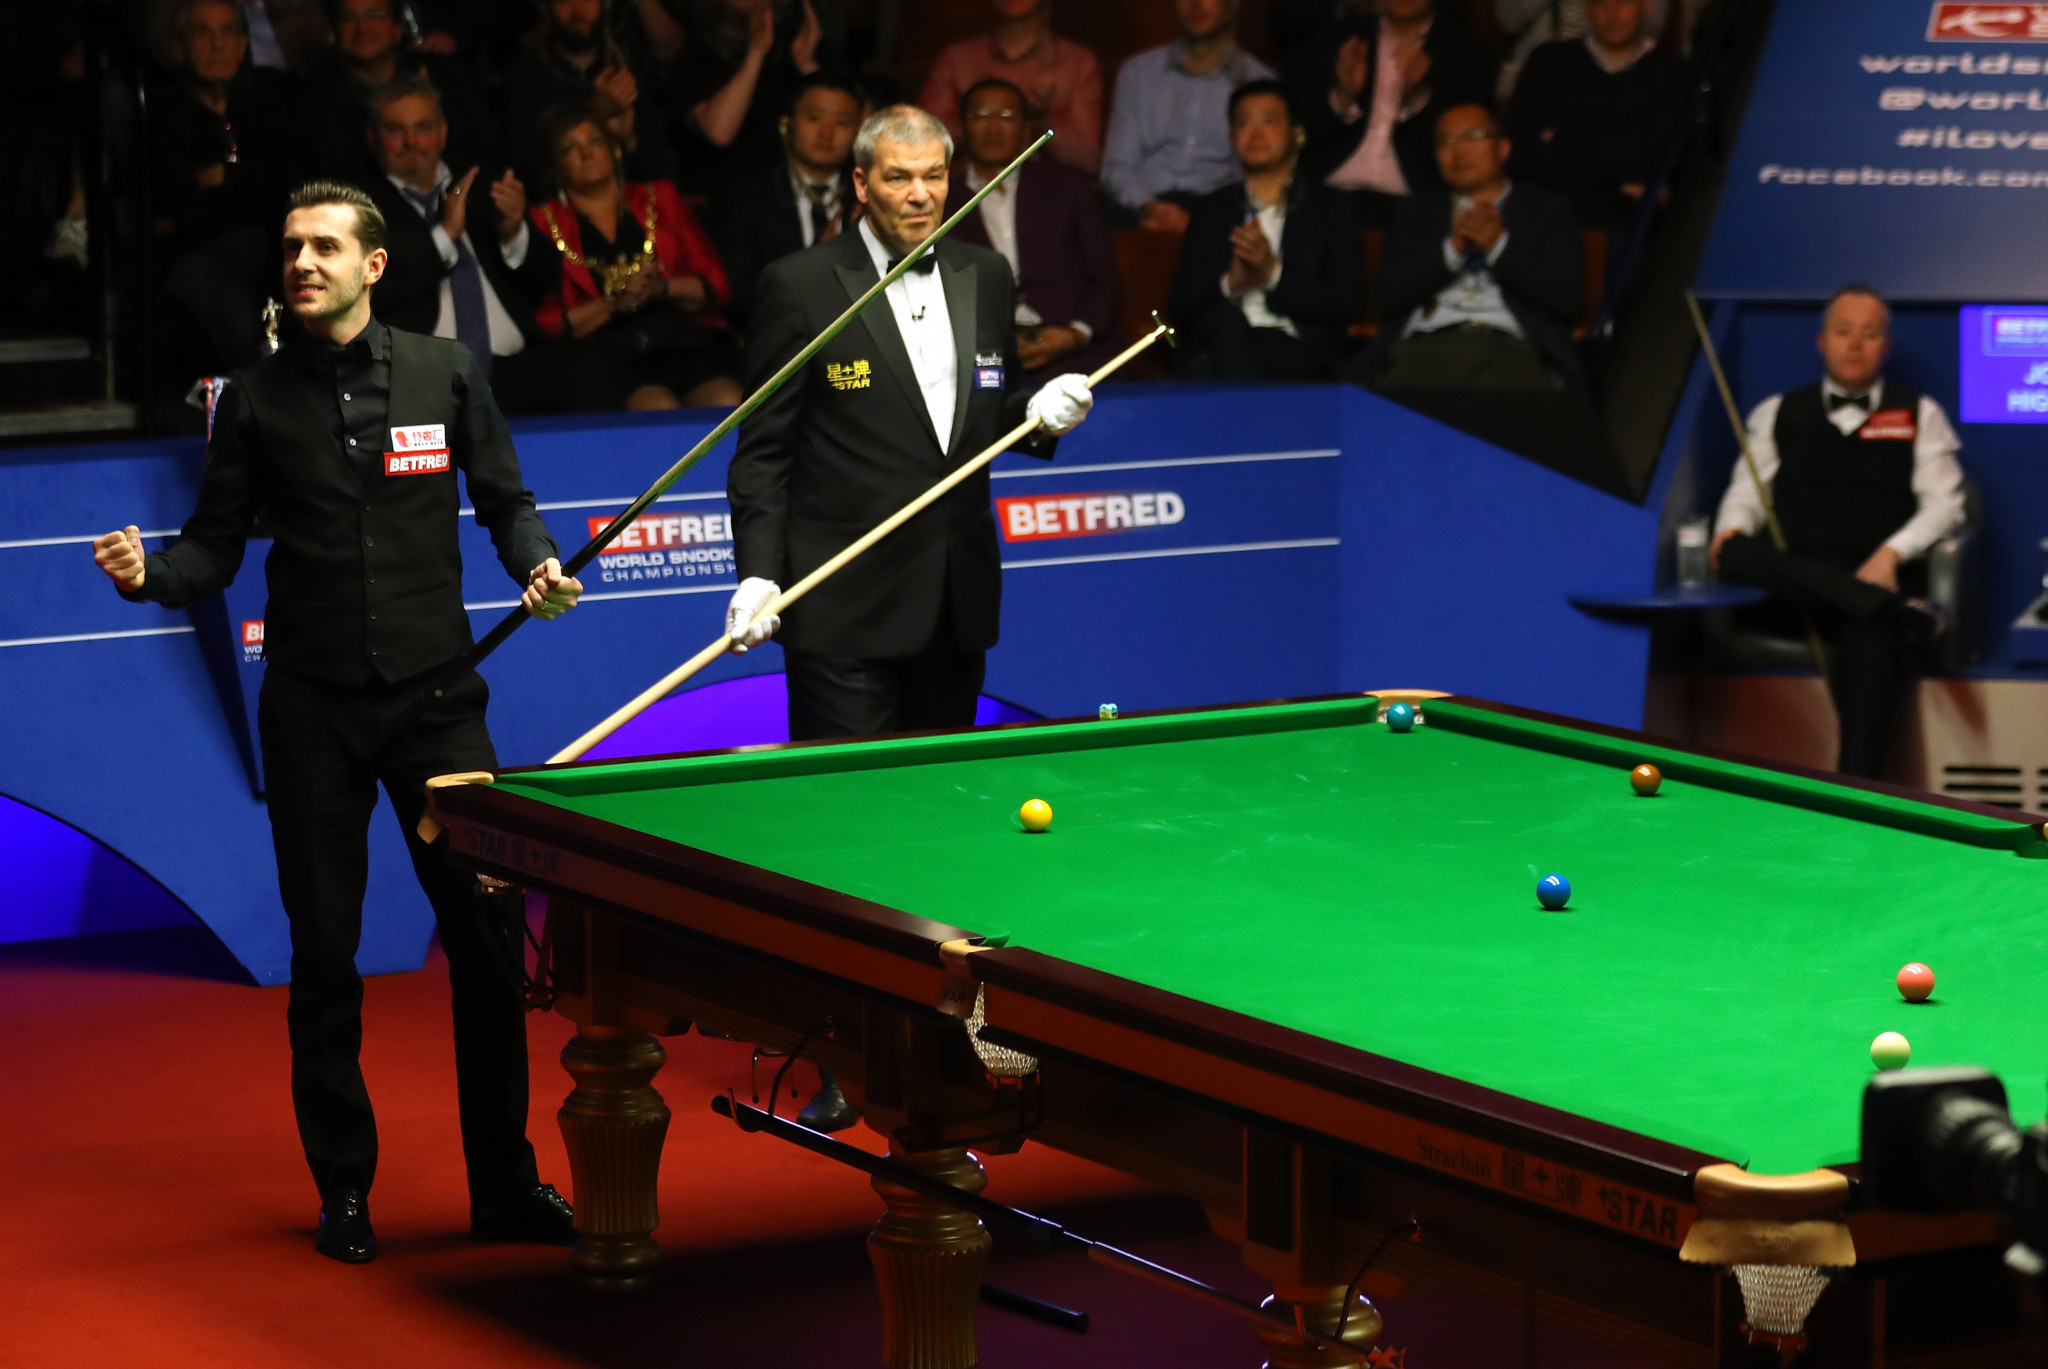 The four semi-finalists will also be invited to compete at the World Snooker Championship ©Getty Images